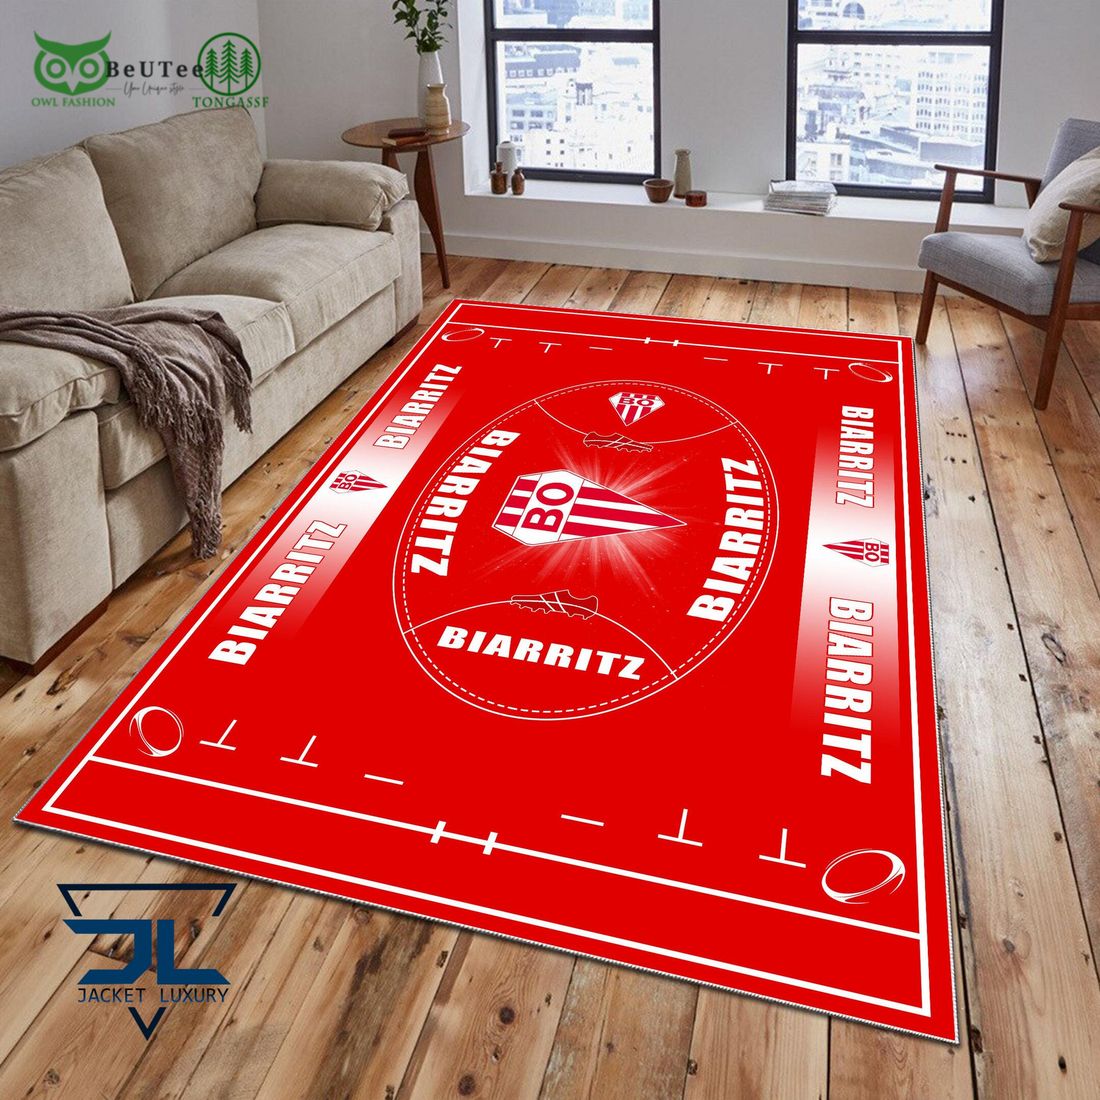 biarritz olympique french rugby carpet rug 1 A3IhV